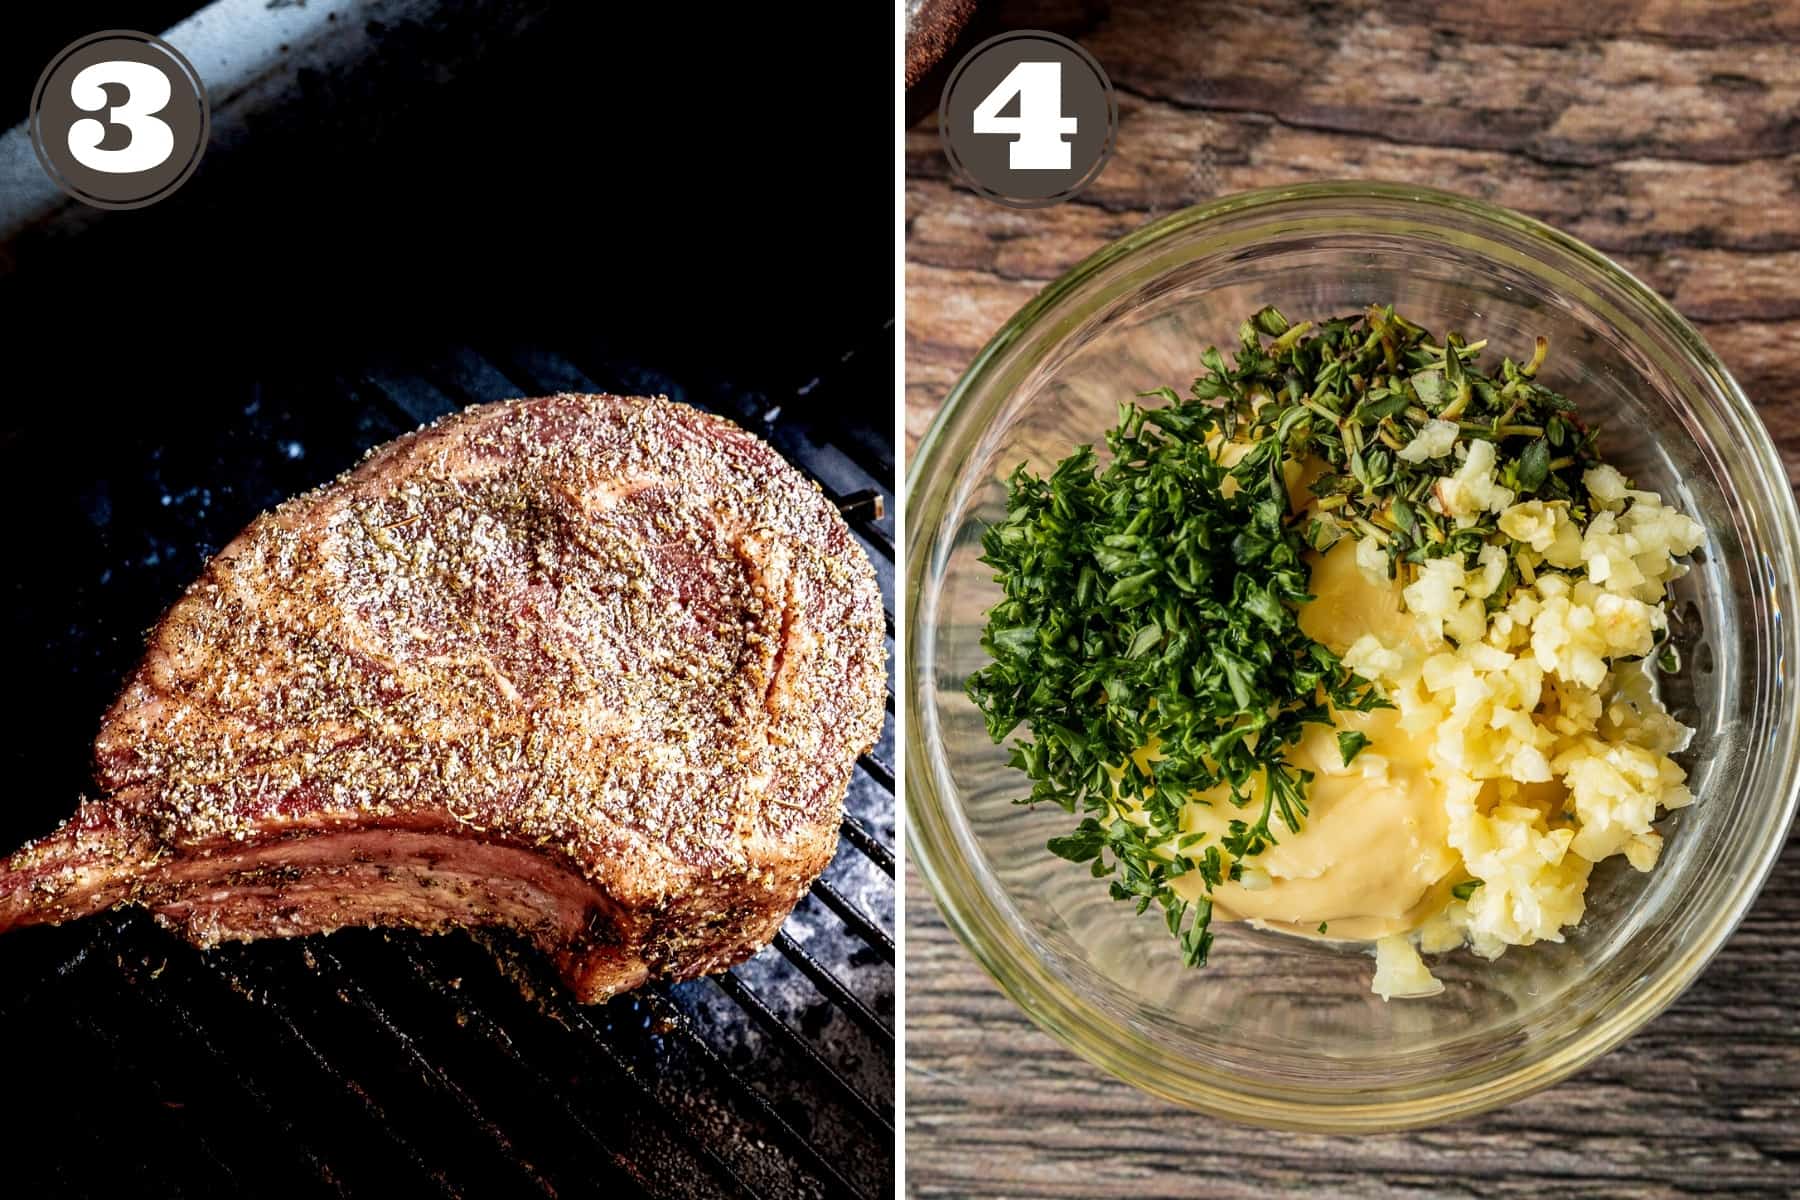 Side by side photos showing a tomohawk steak on a pellet grill and a compound butter in a small bowl.